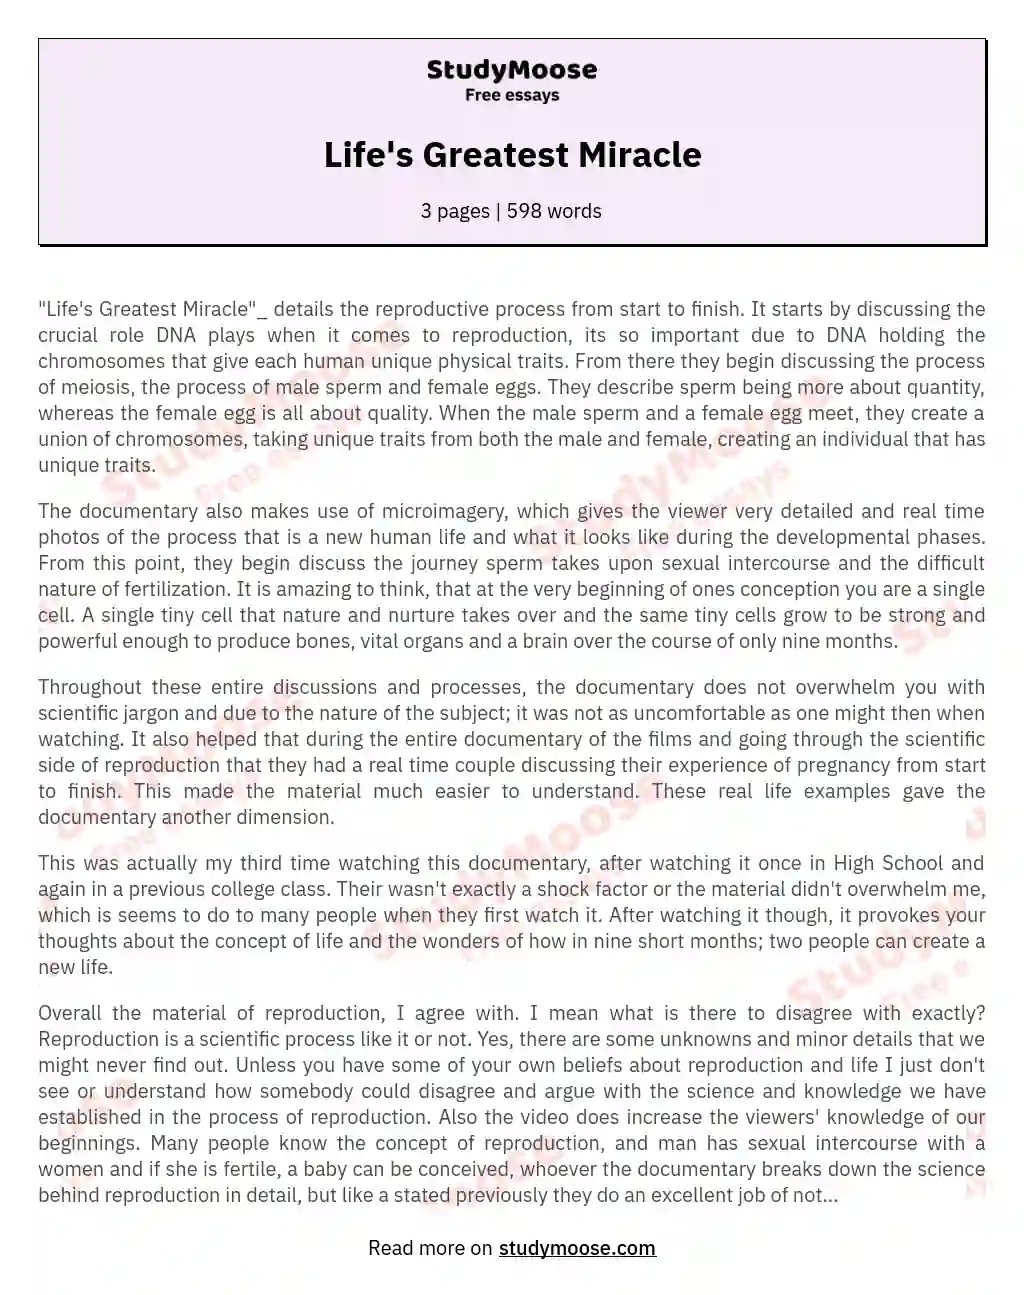 Life's Greatest Miracle essay